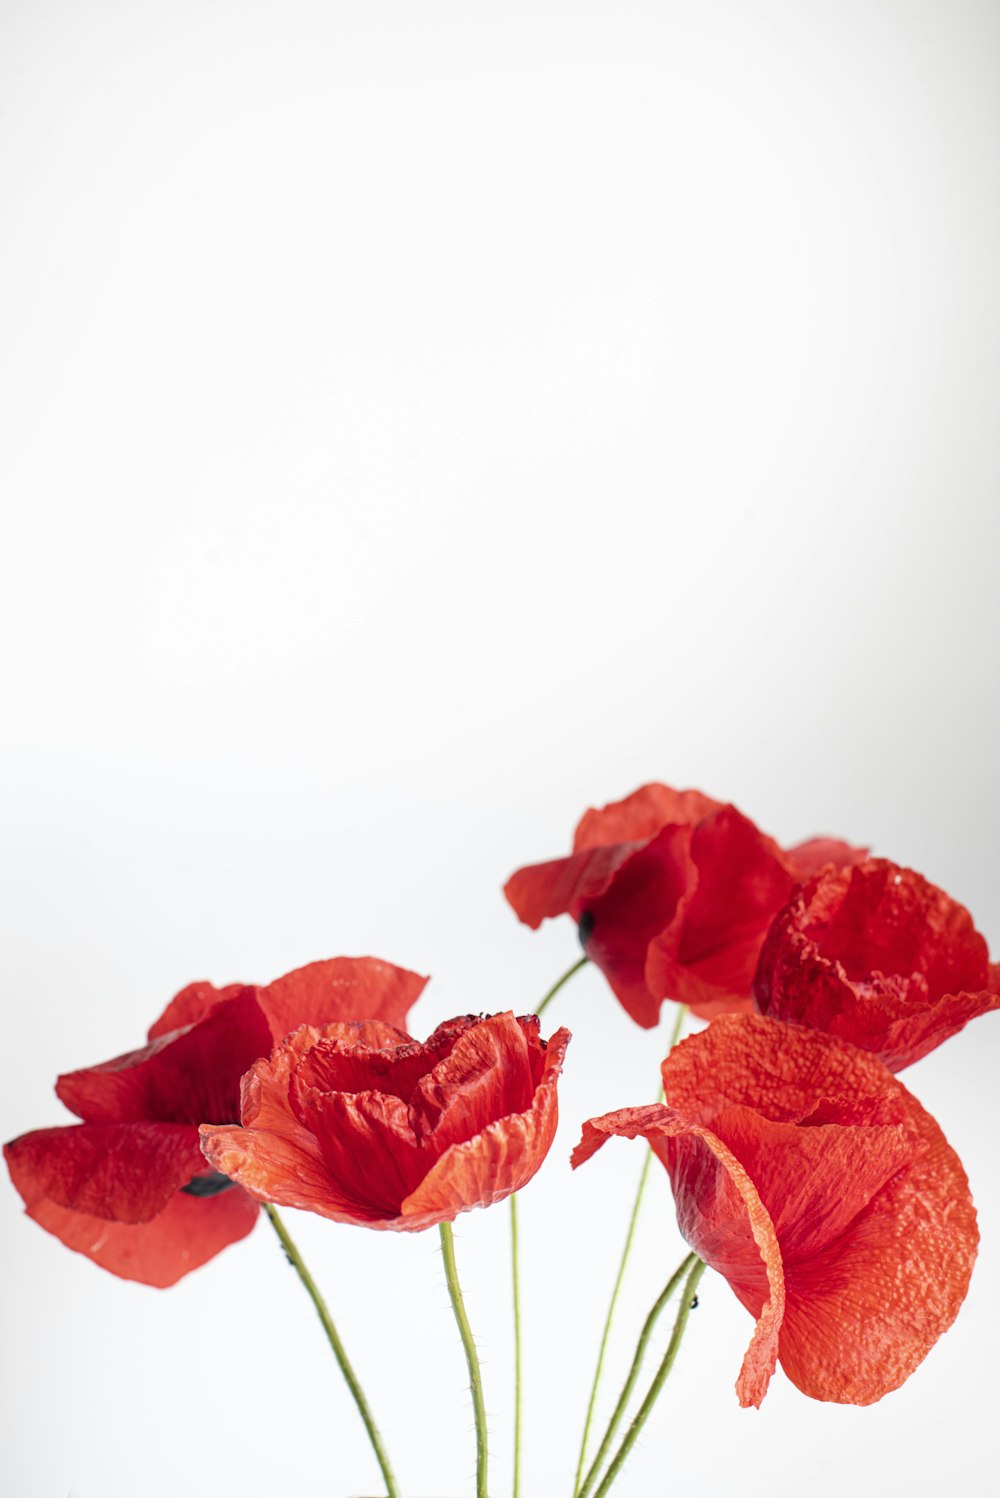 500+ Poppy Pictures [HD] | Download Free Images on Unsplash